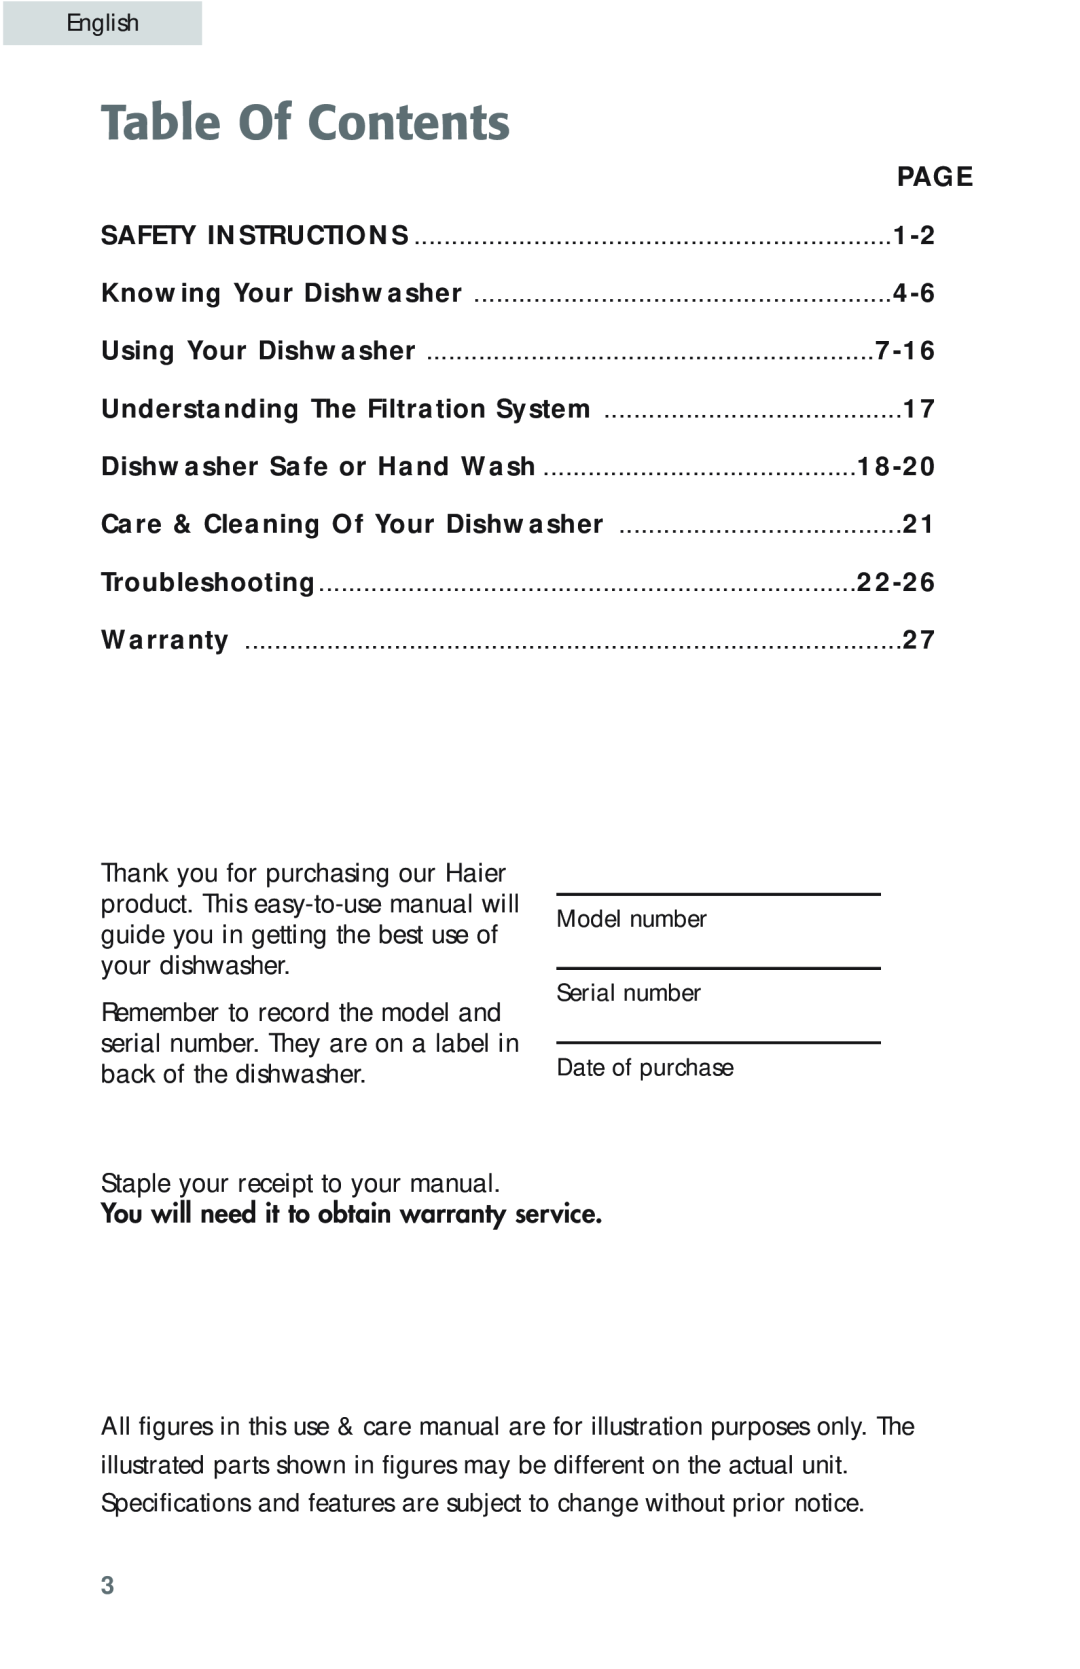 Haier HDB18EB user manual Page, 7-16, 18-20, 22-26, Table Of Contents 